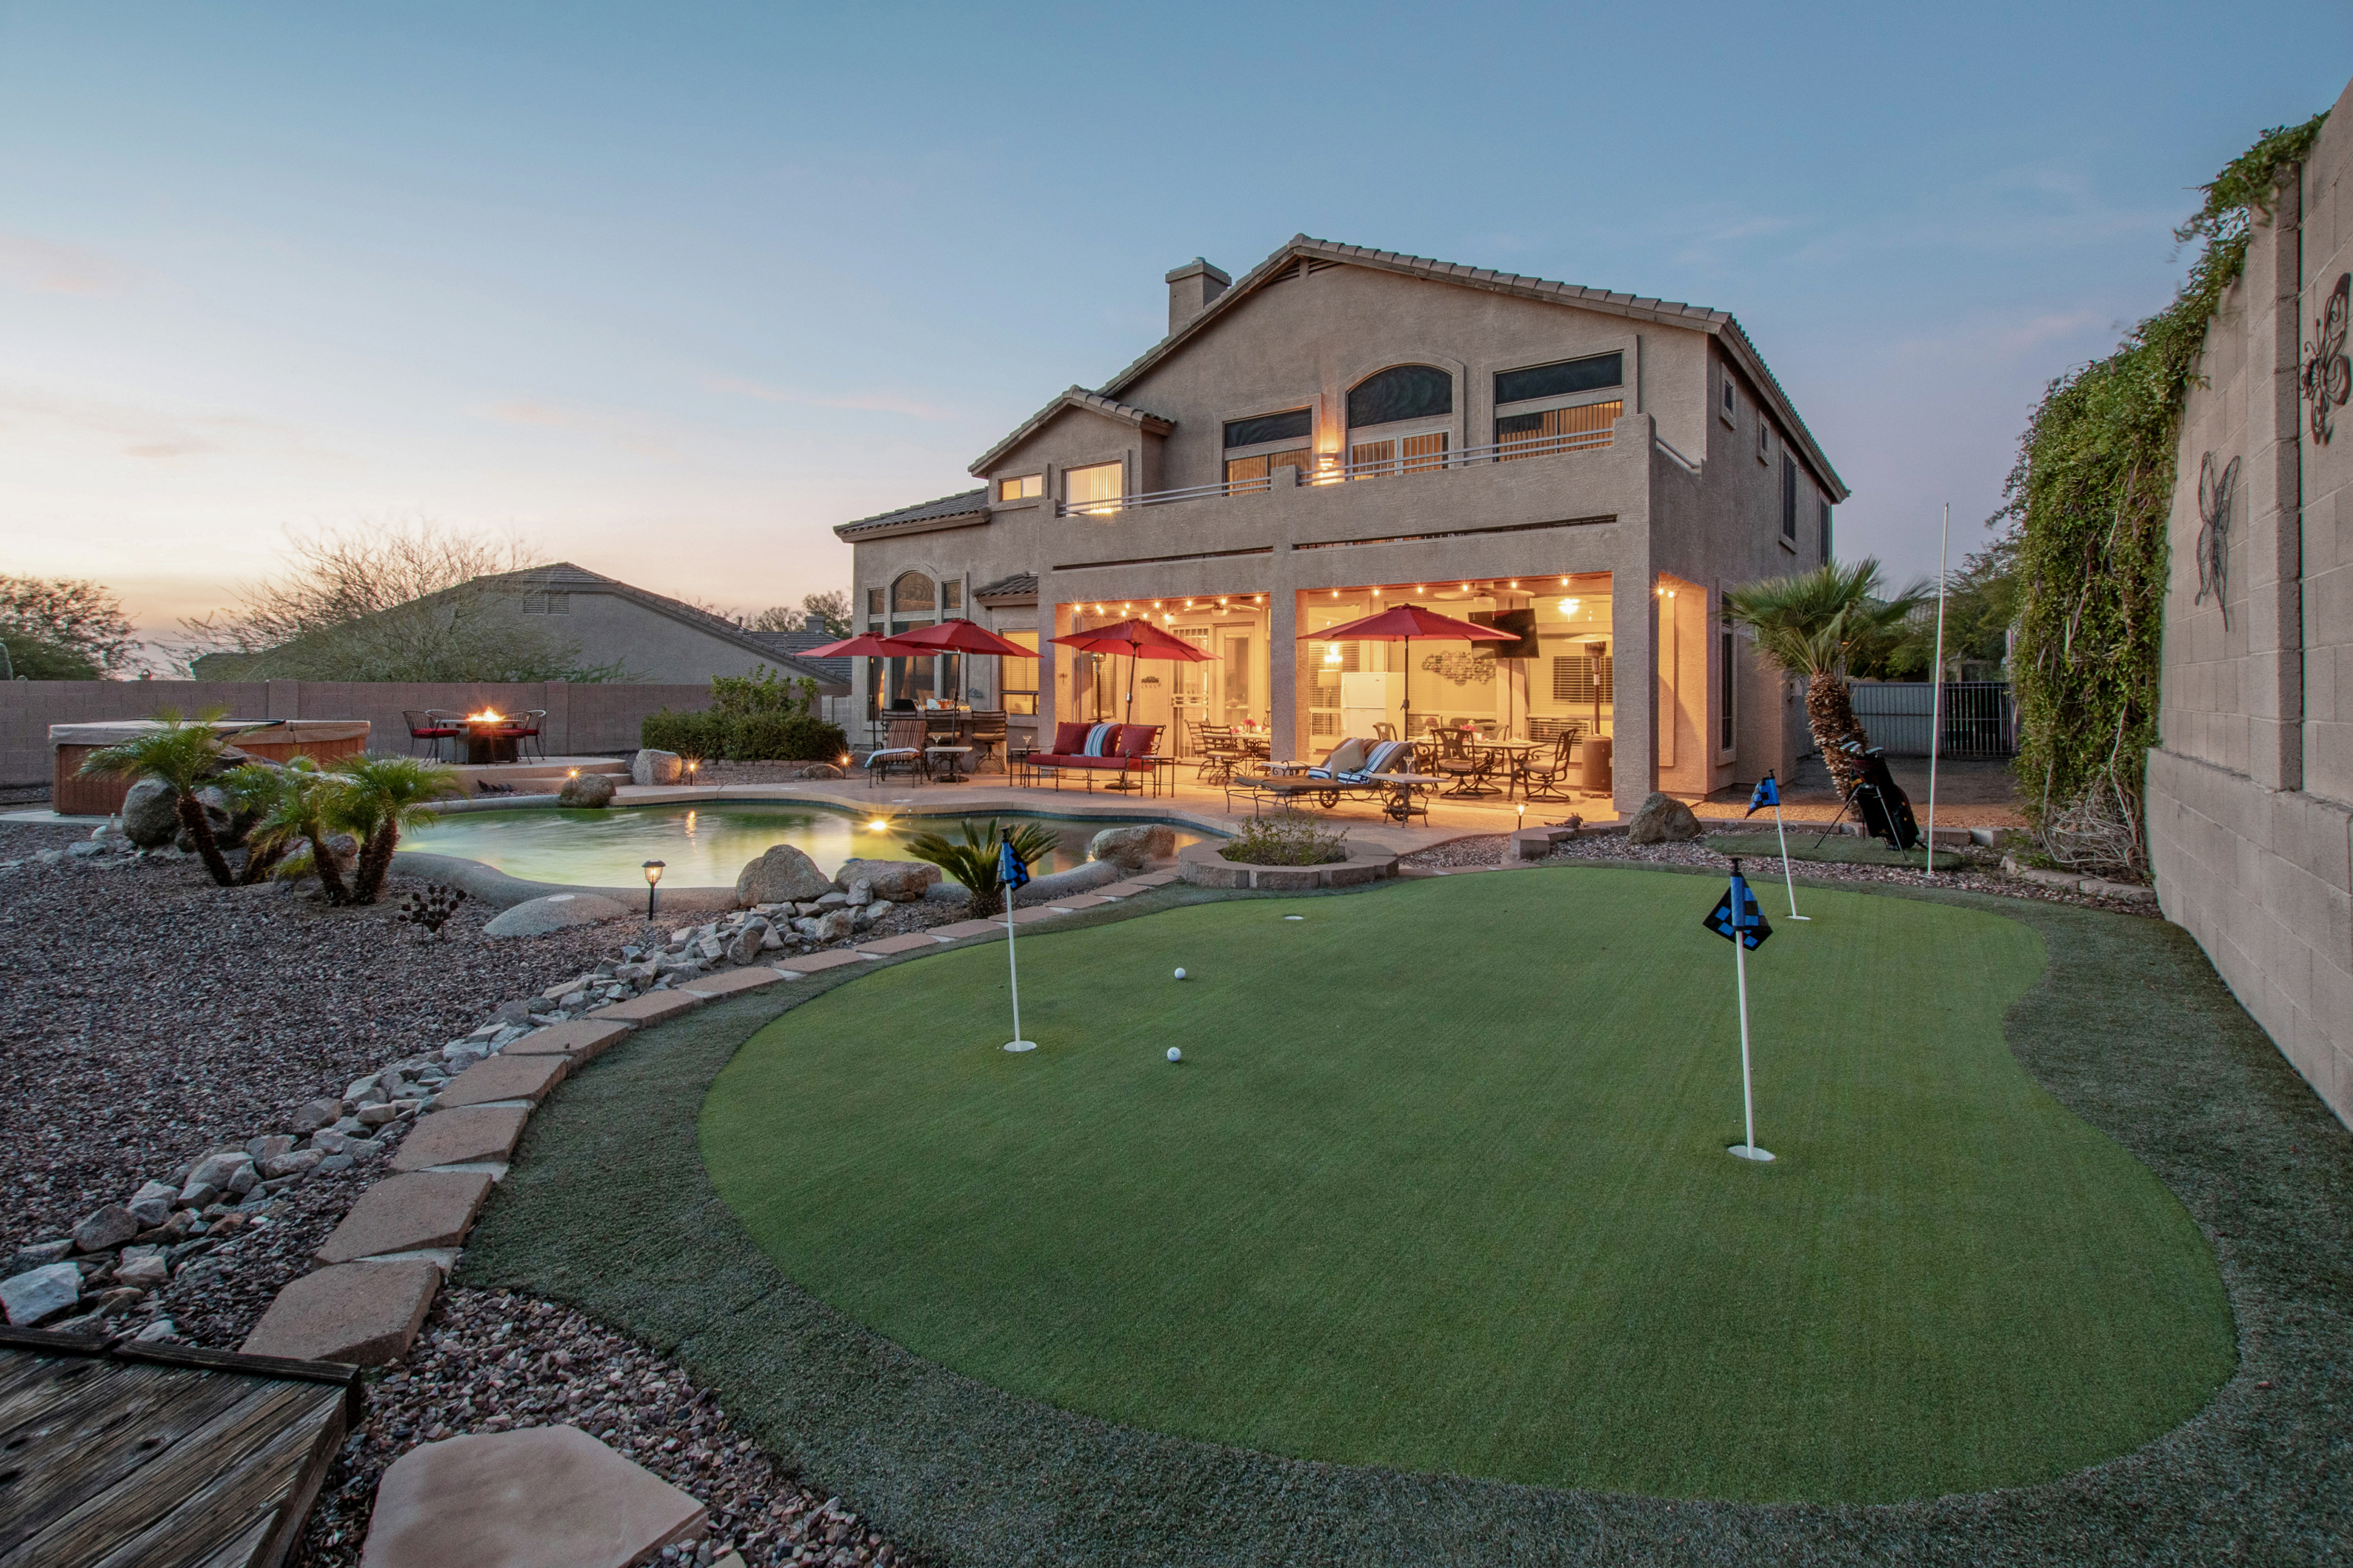 Warm up your shots on the private putting green before heading to one of many nearby courses.